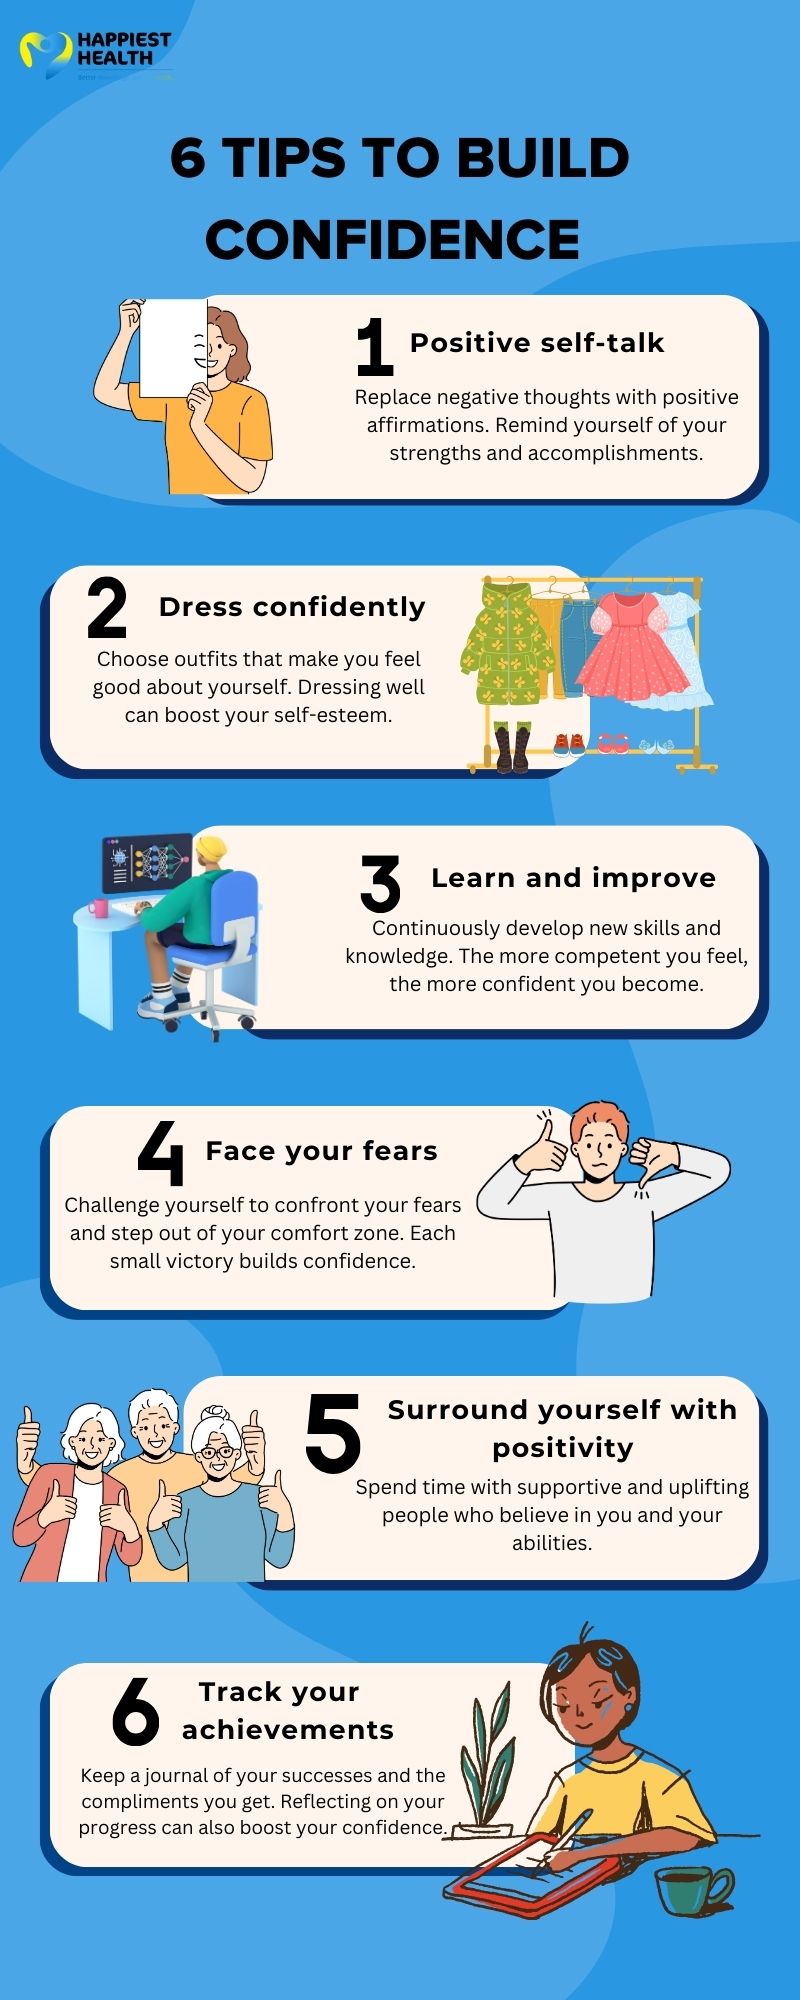 6 tips to build confidence